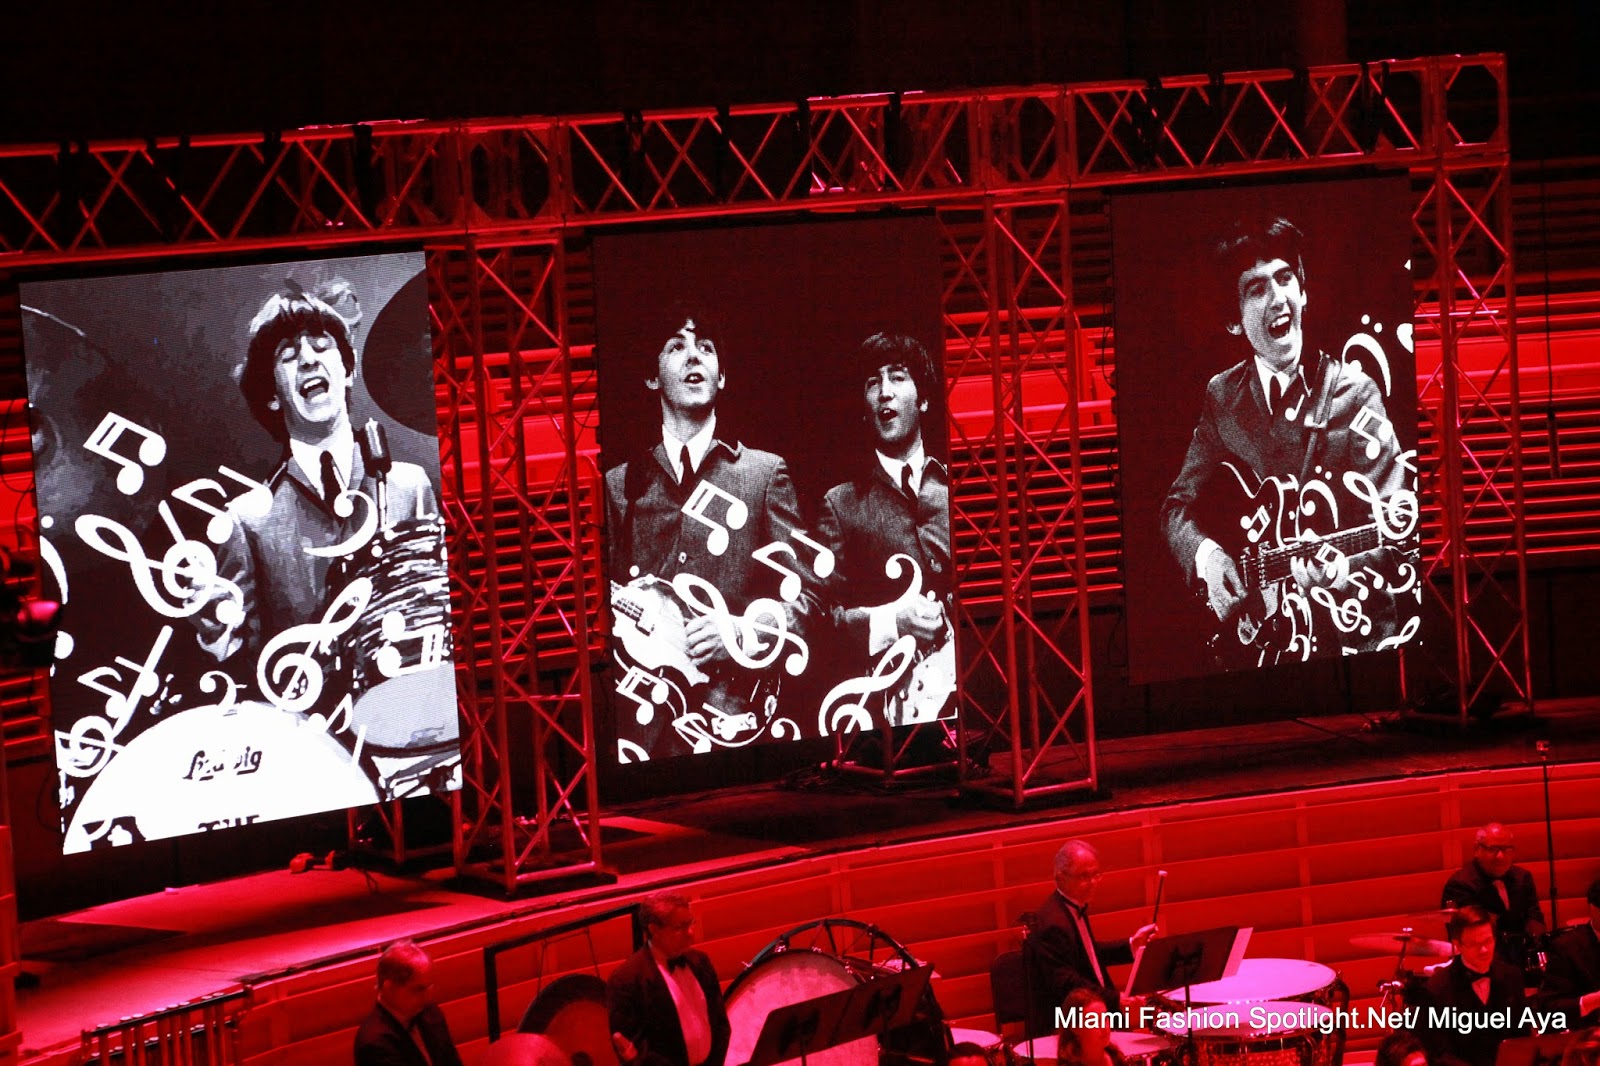 Miami Symphony Orchestra celebrated 50 years of the Beatles with a full house concert